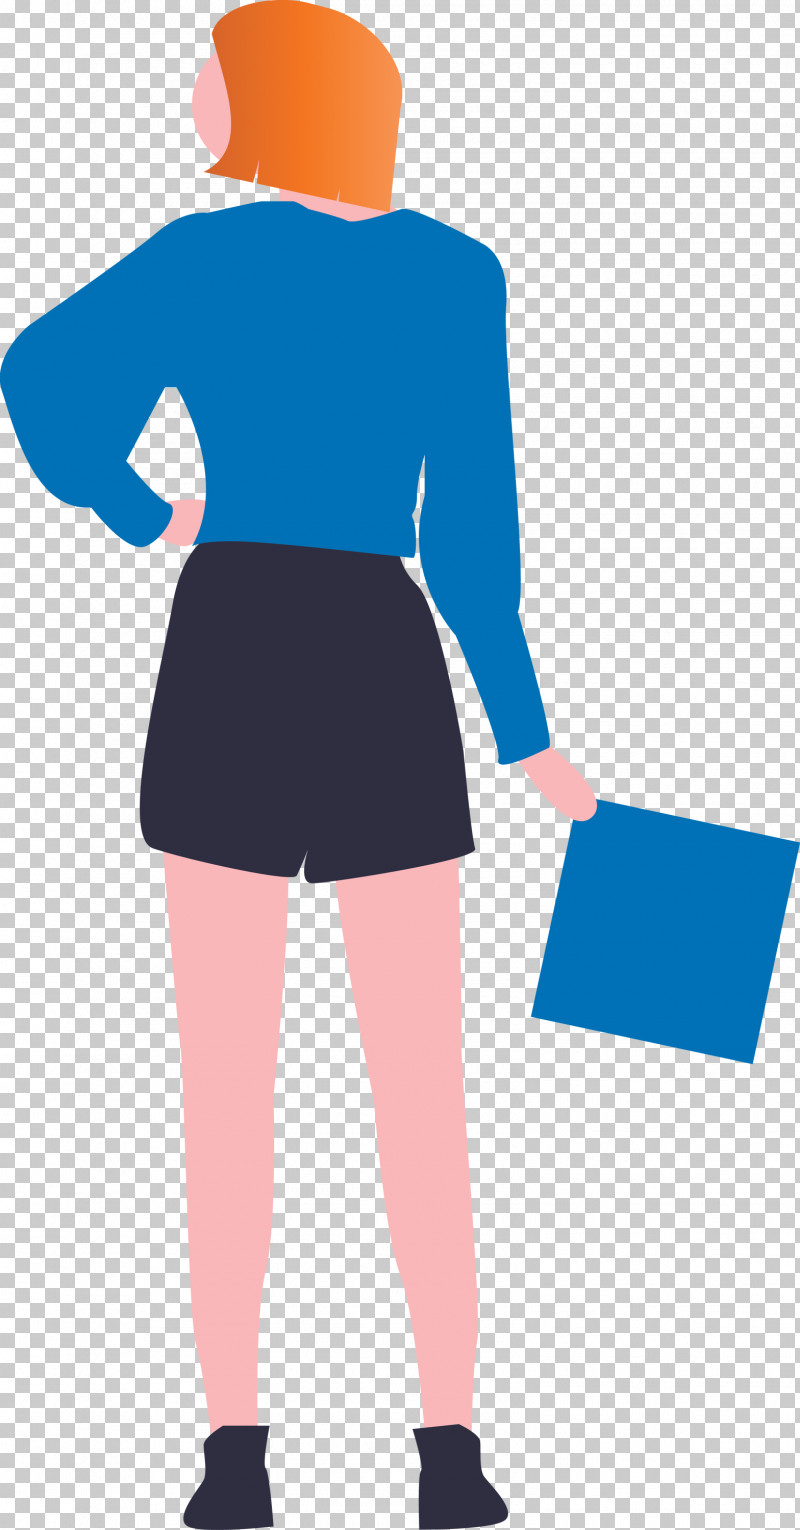 Woman Holding Paper Fashion Lady PNG, Clipart, Blue, Clothing, Costume, Electric Blue, Fashion Lady Free PNG Download